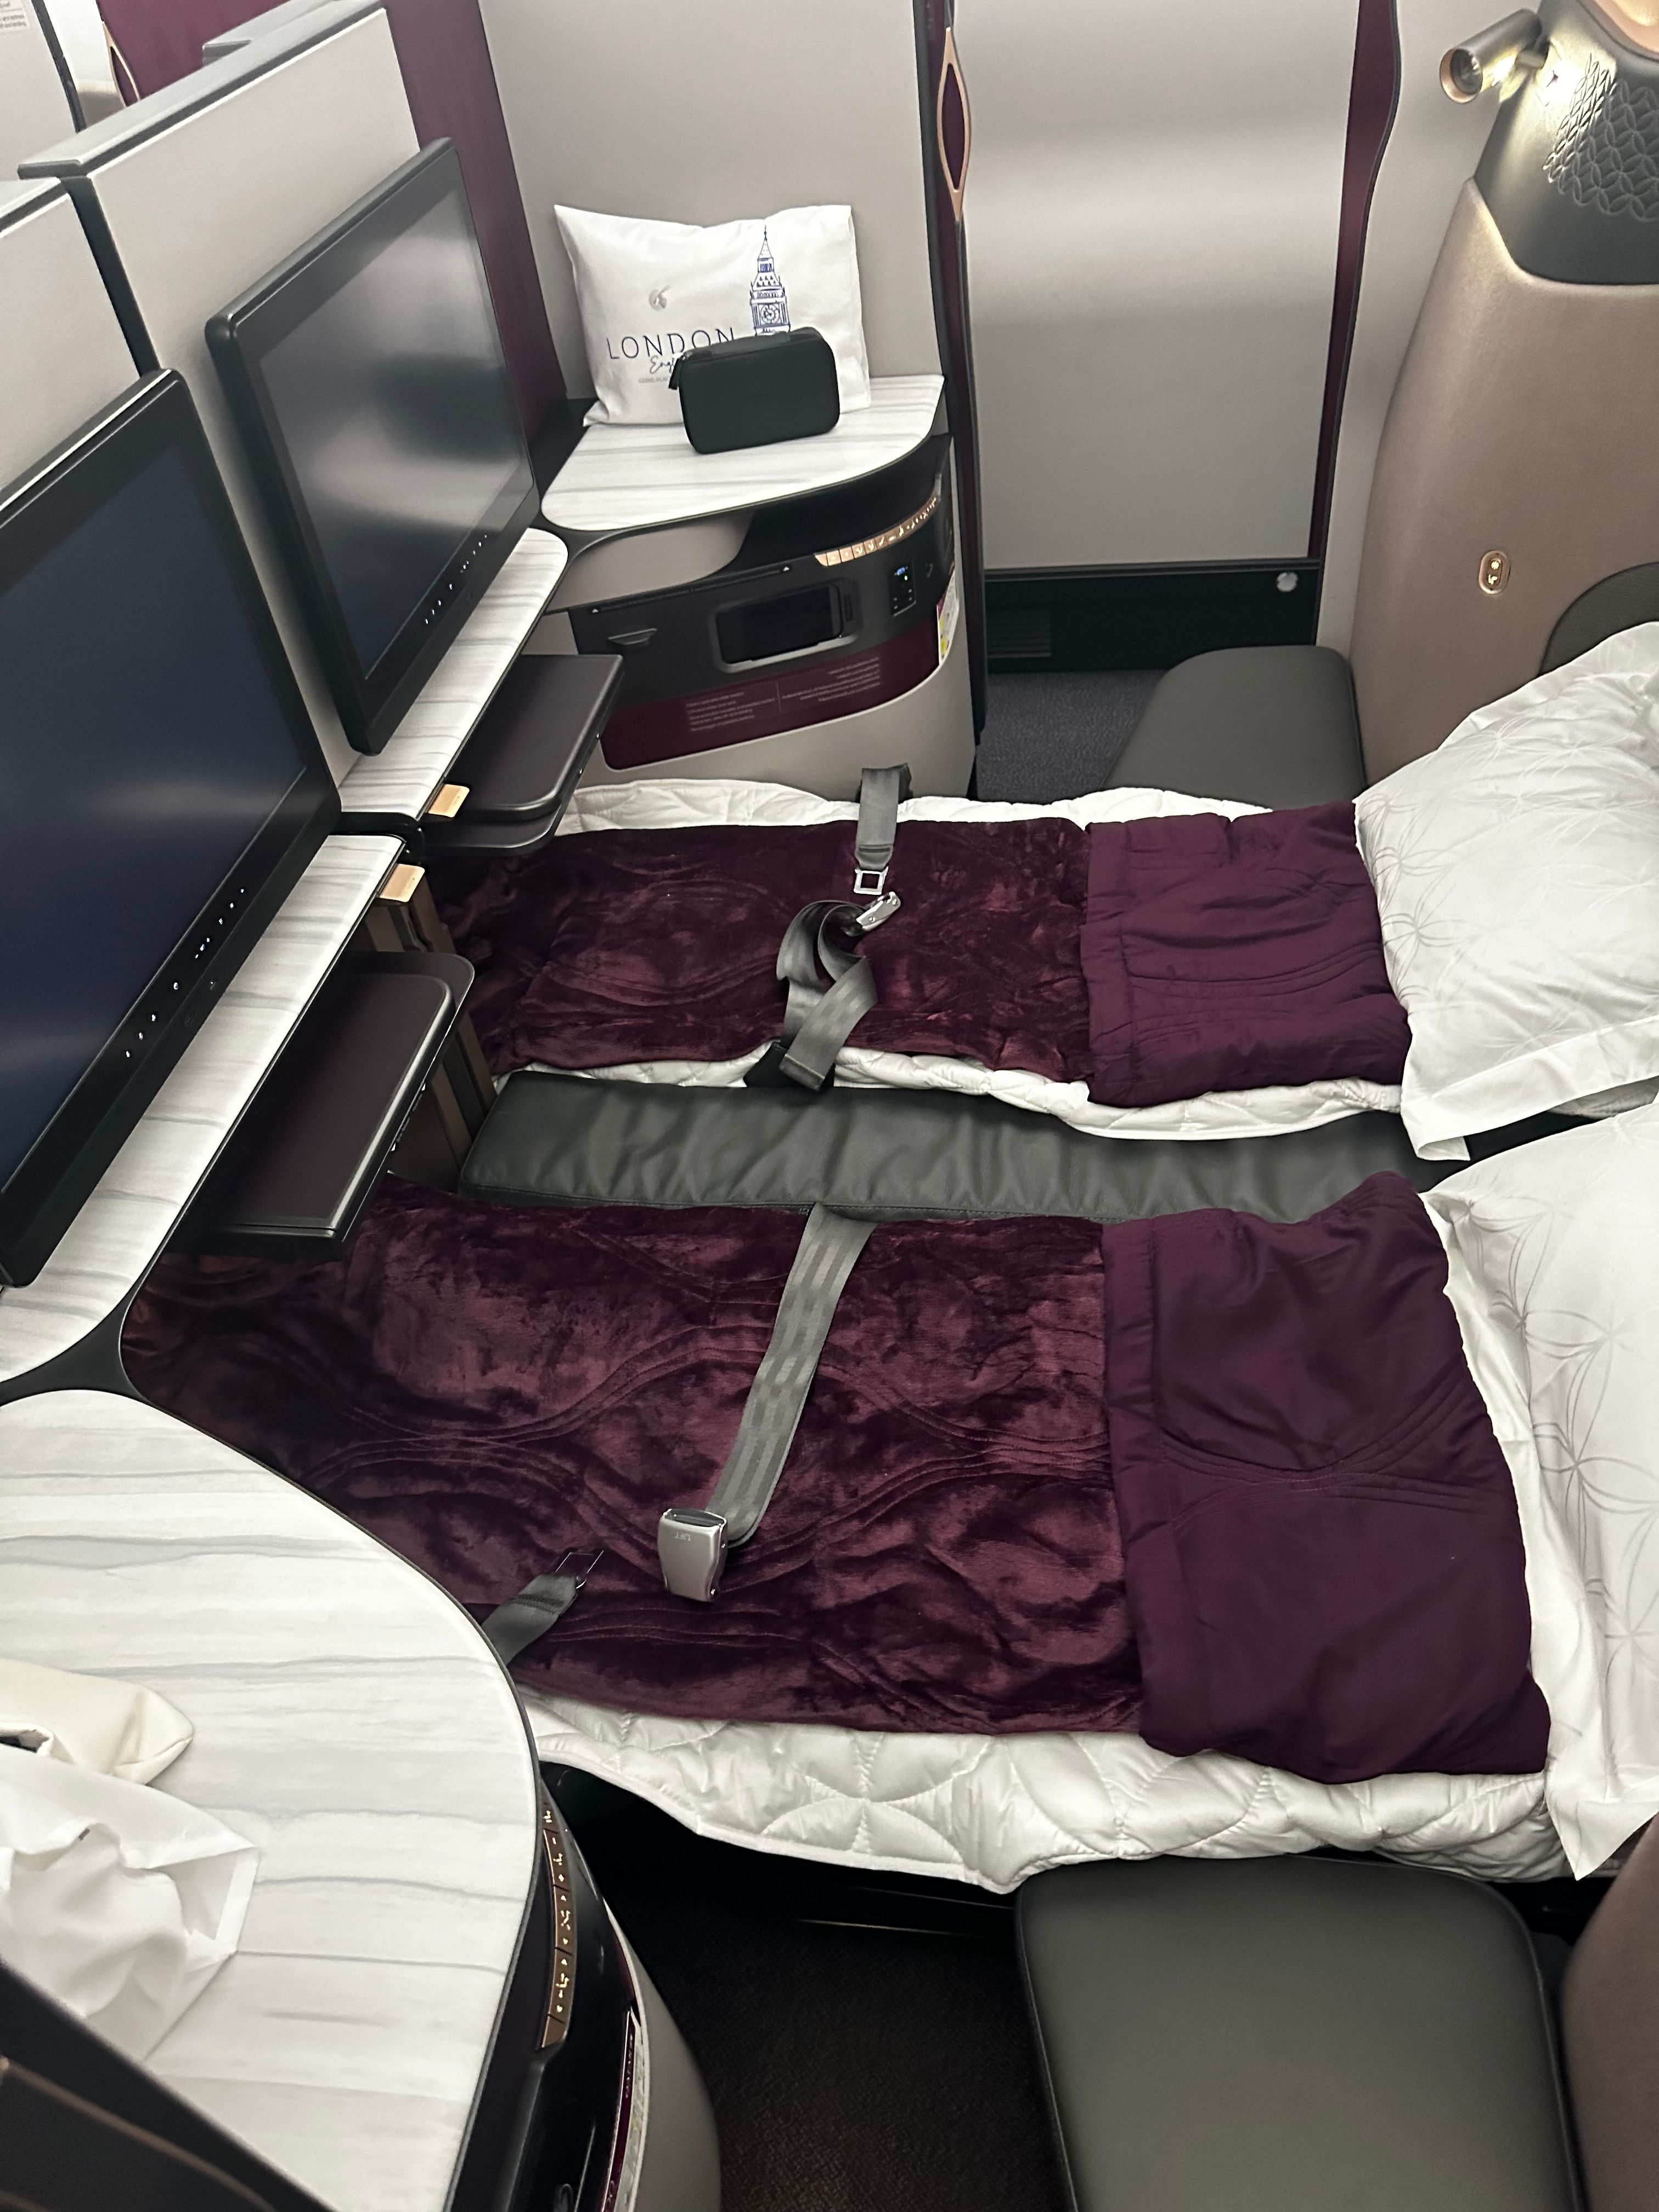 Two Qatar Airways QSuite beds made.